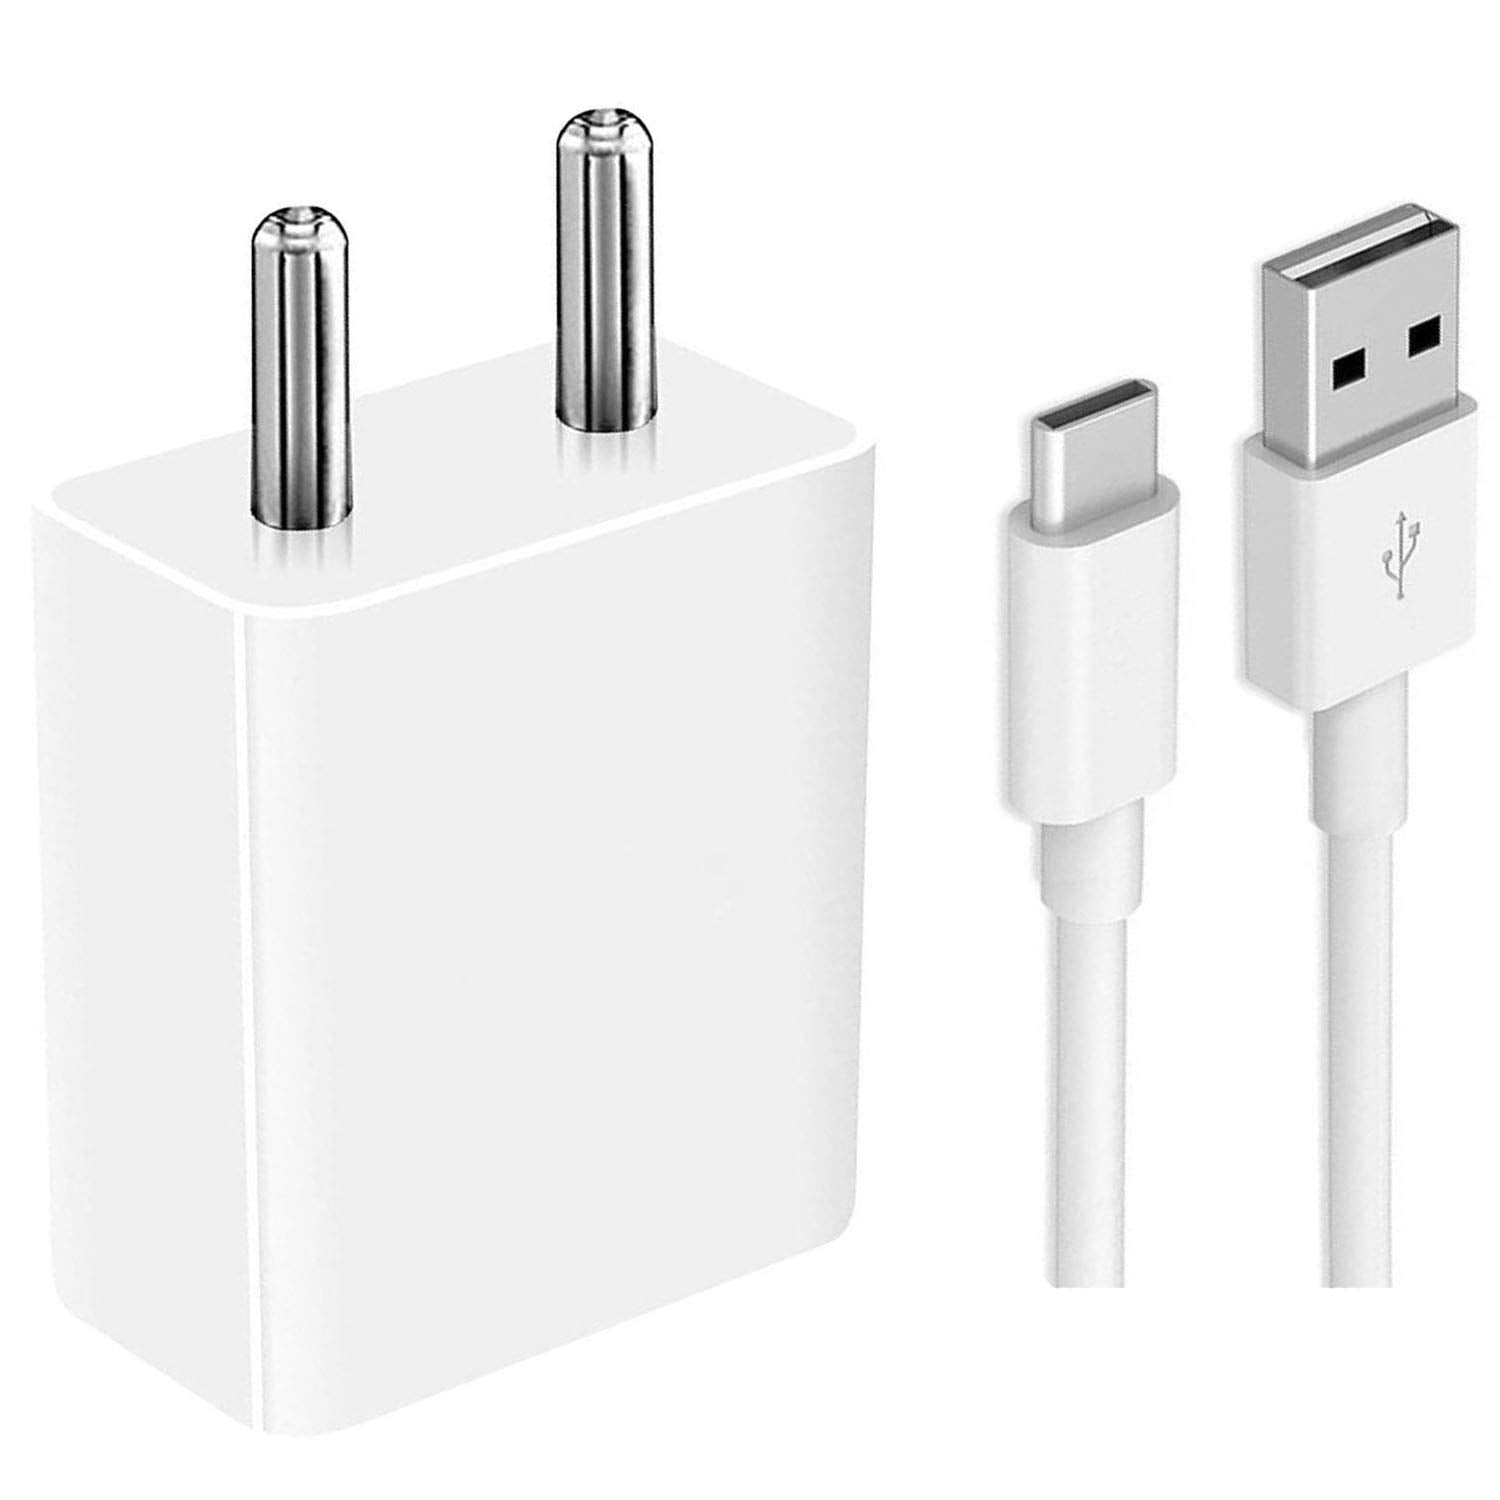 Oppo A55 18W Vooc Fast Charge Charger With Type-C Data Cable 1M White